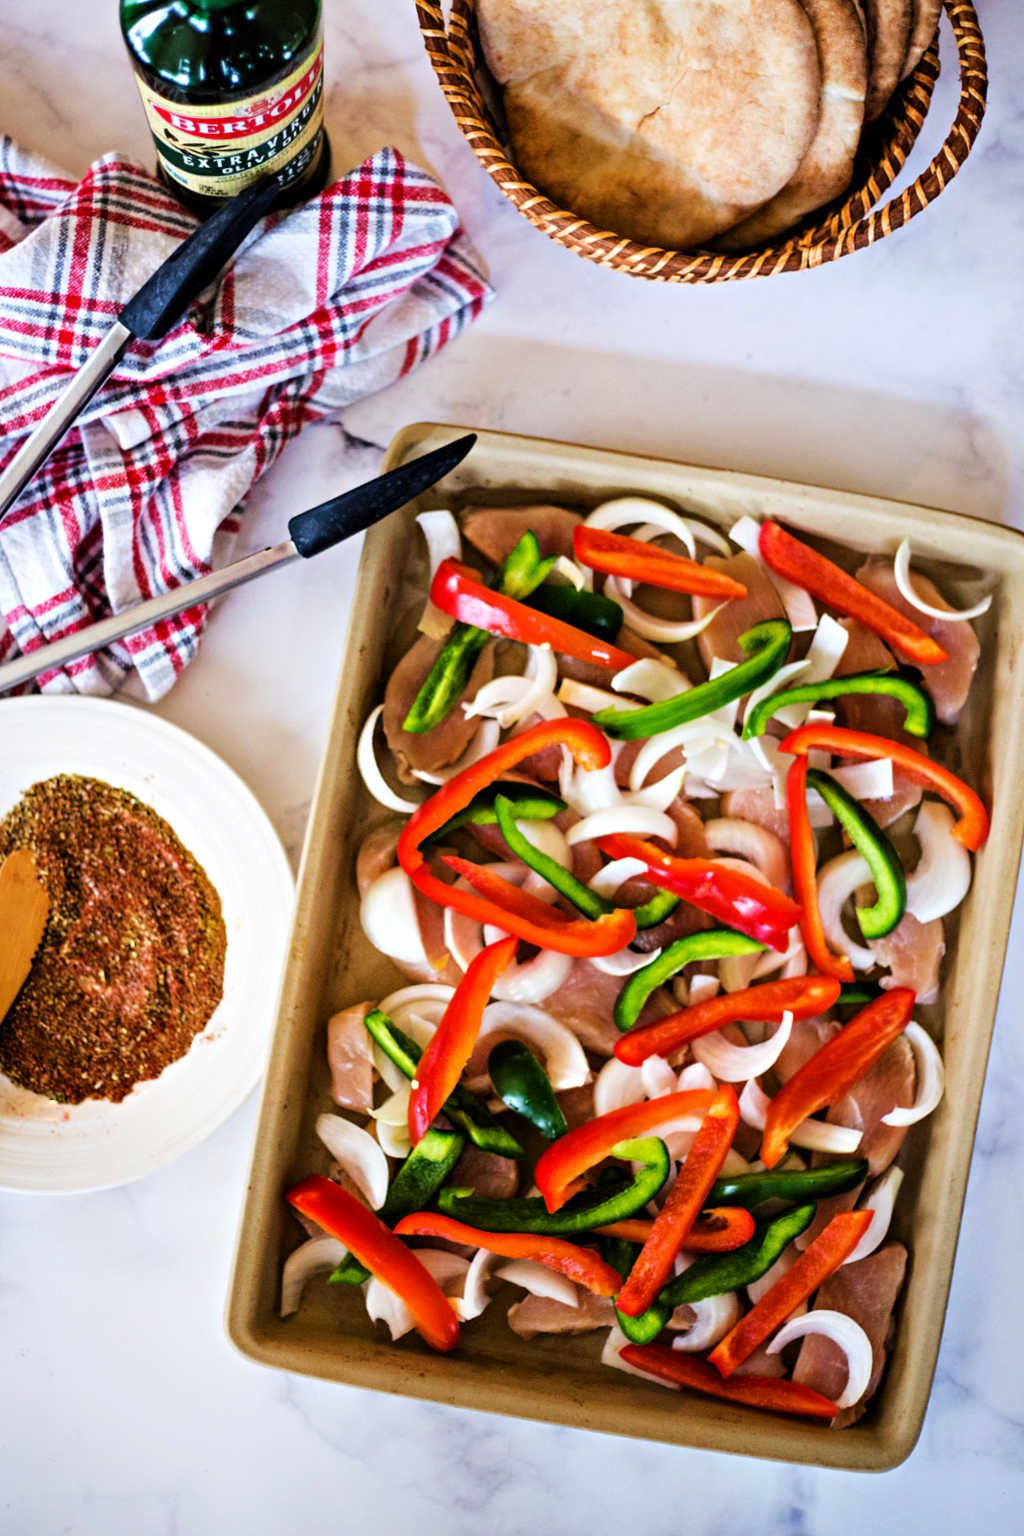 chicken, onion, and bell peppers on a baking sheet for chicken fajitas